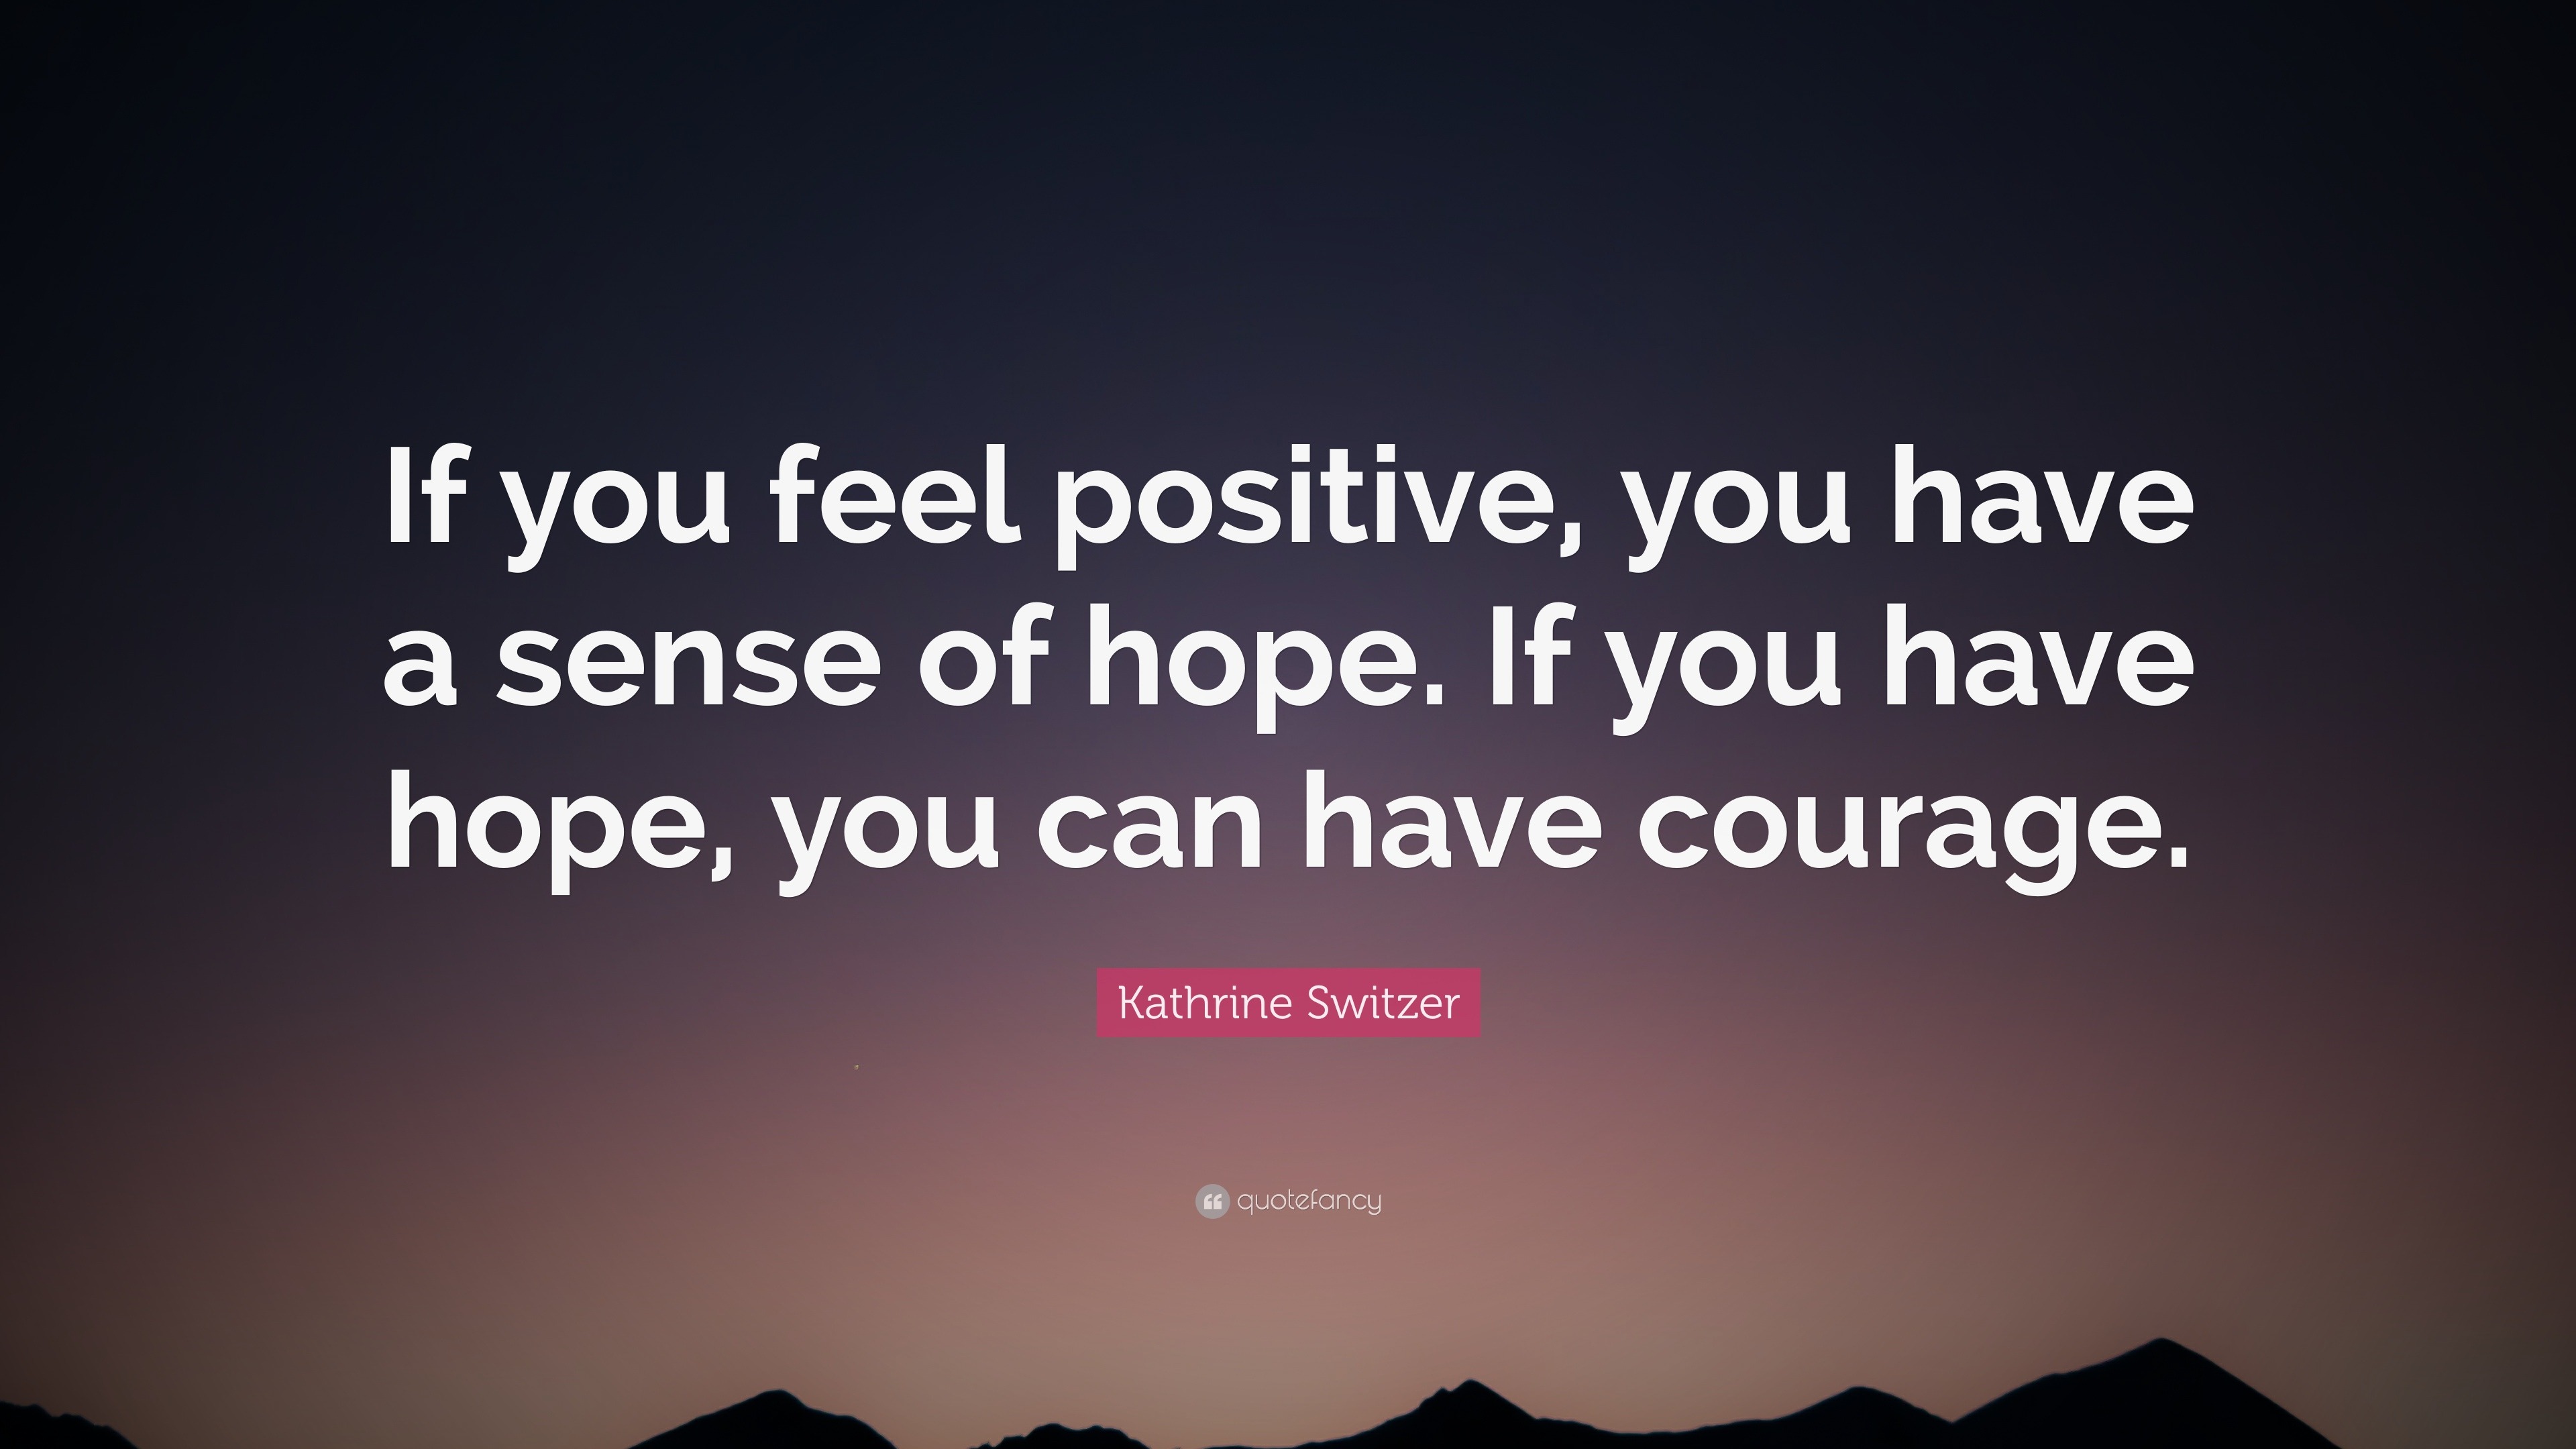 inspirational quotes about hope and courage